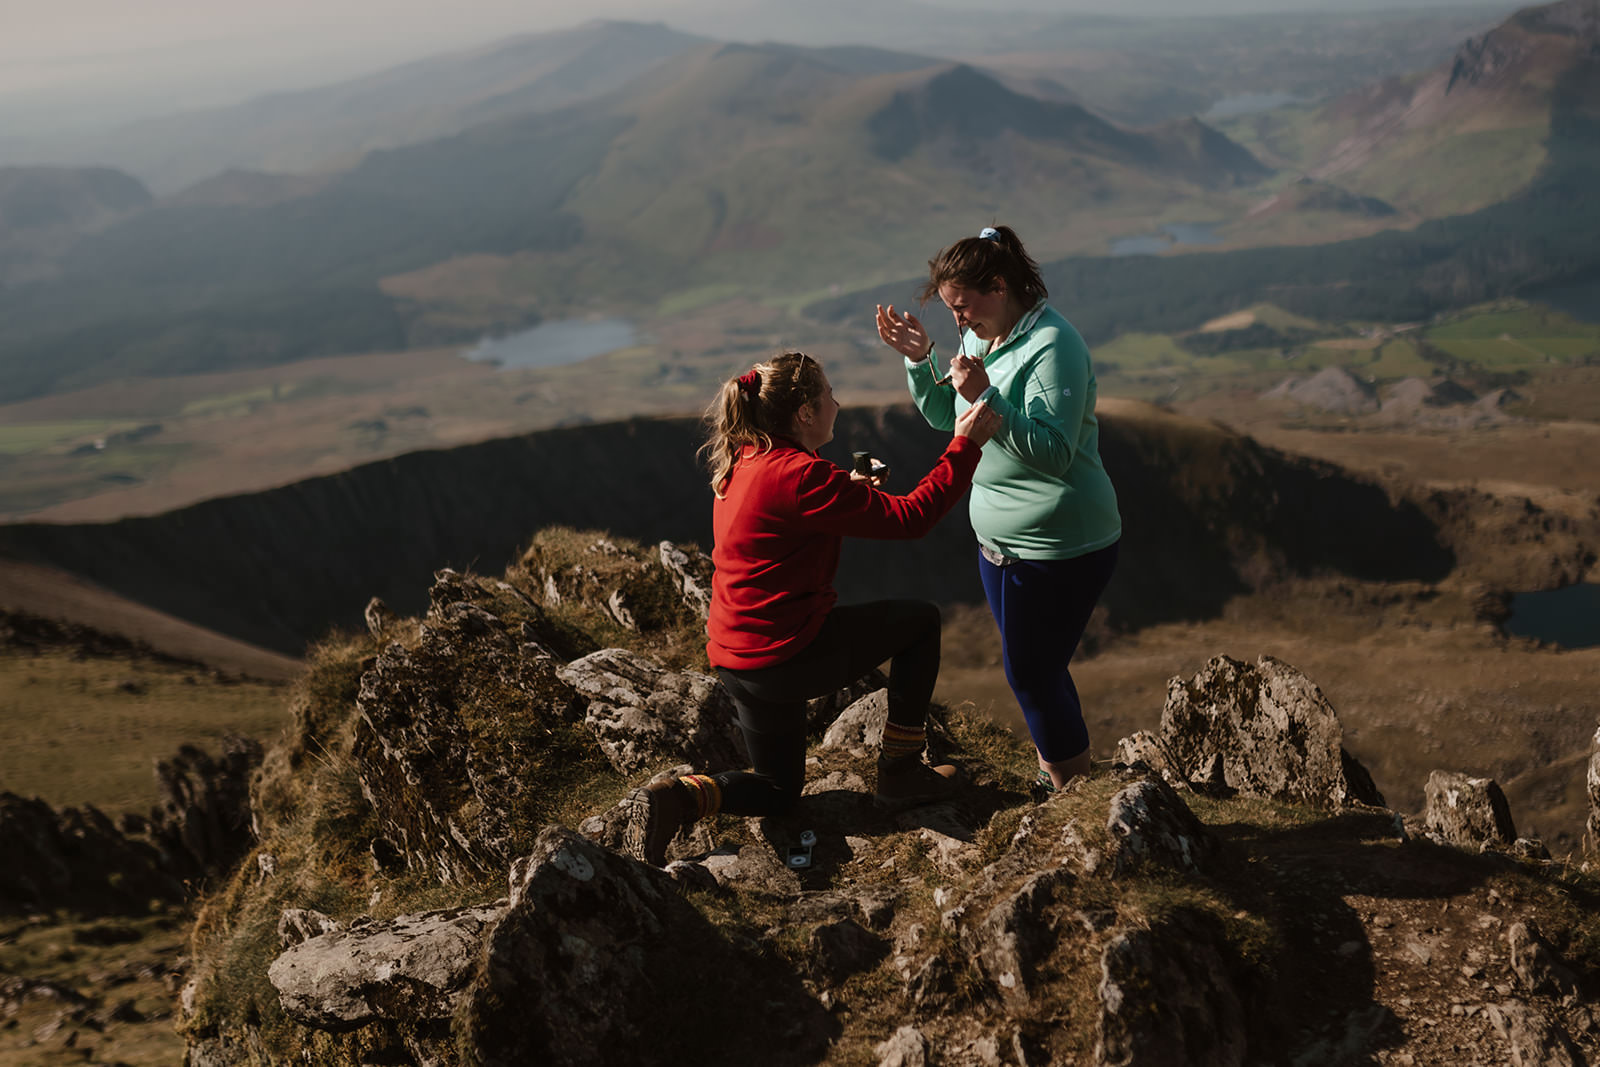 Surprise proposal planning and photography on Yr Wyddfa (Snowdon)